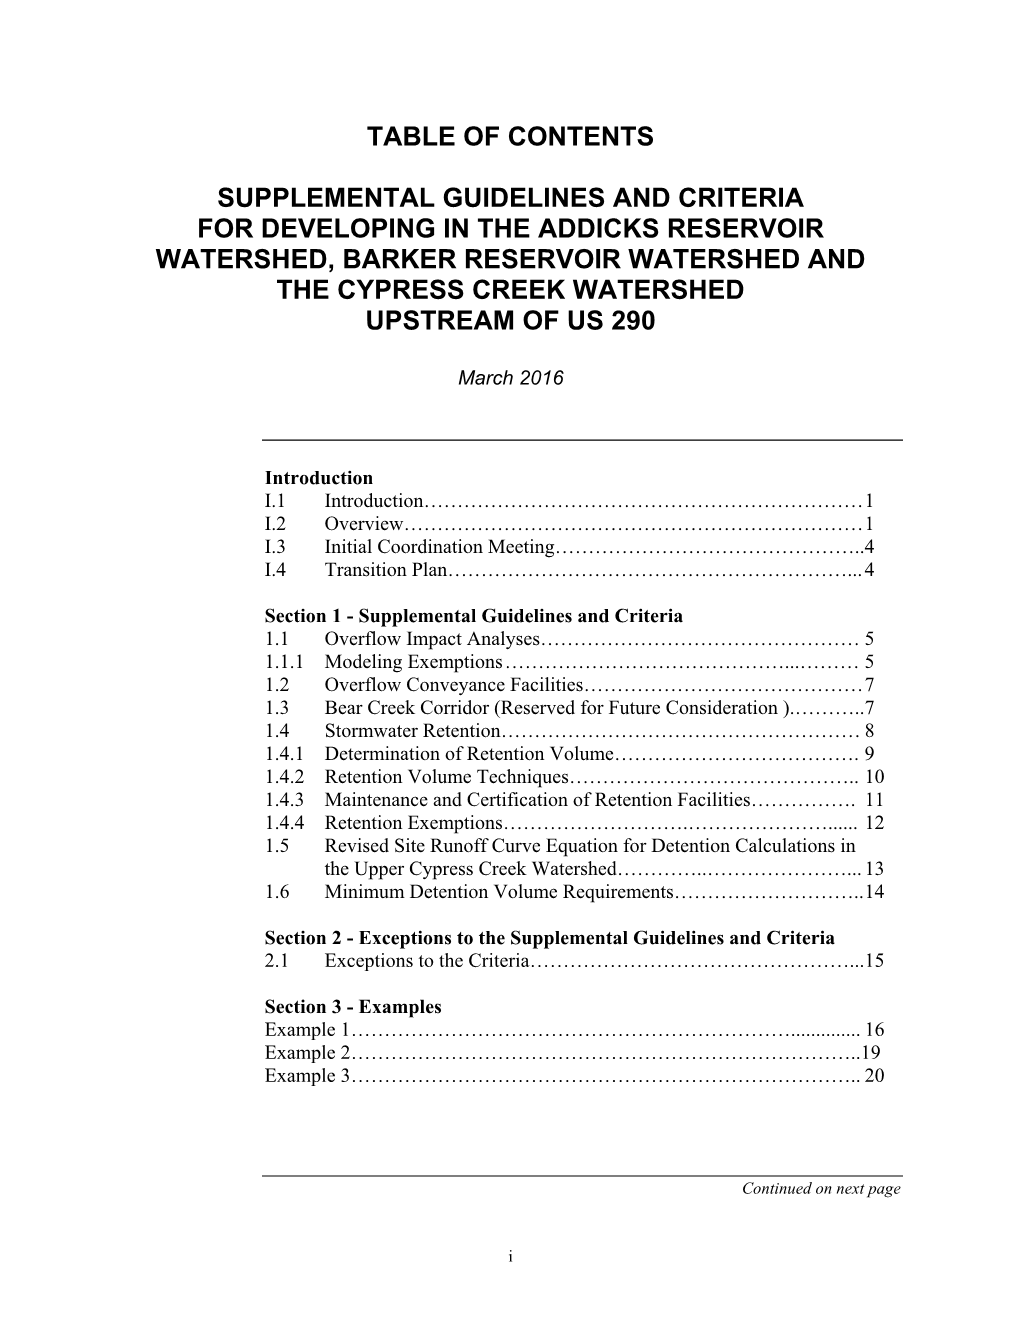 Table of Contents Supplemental Guidelines